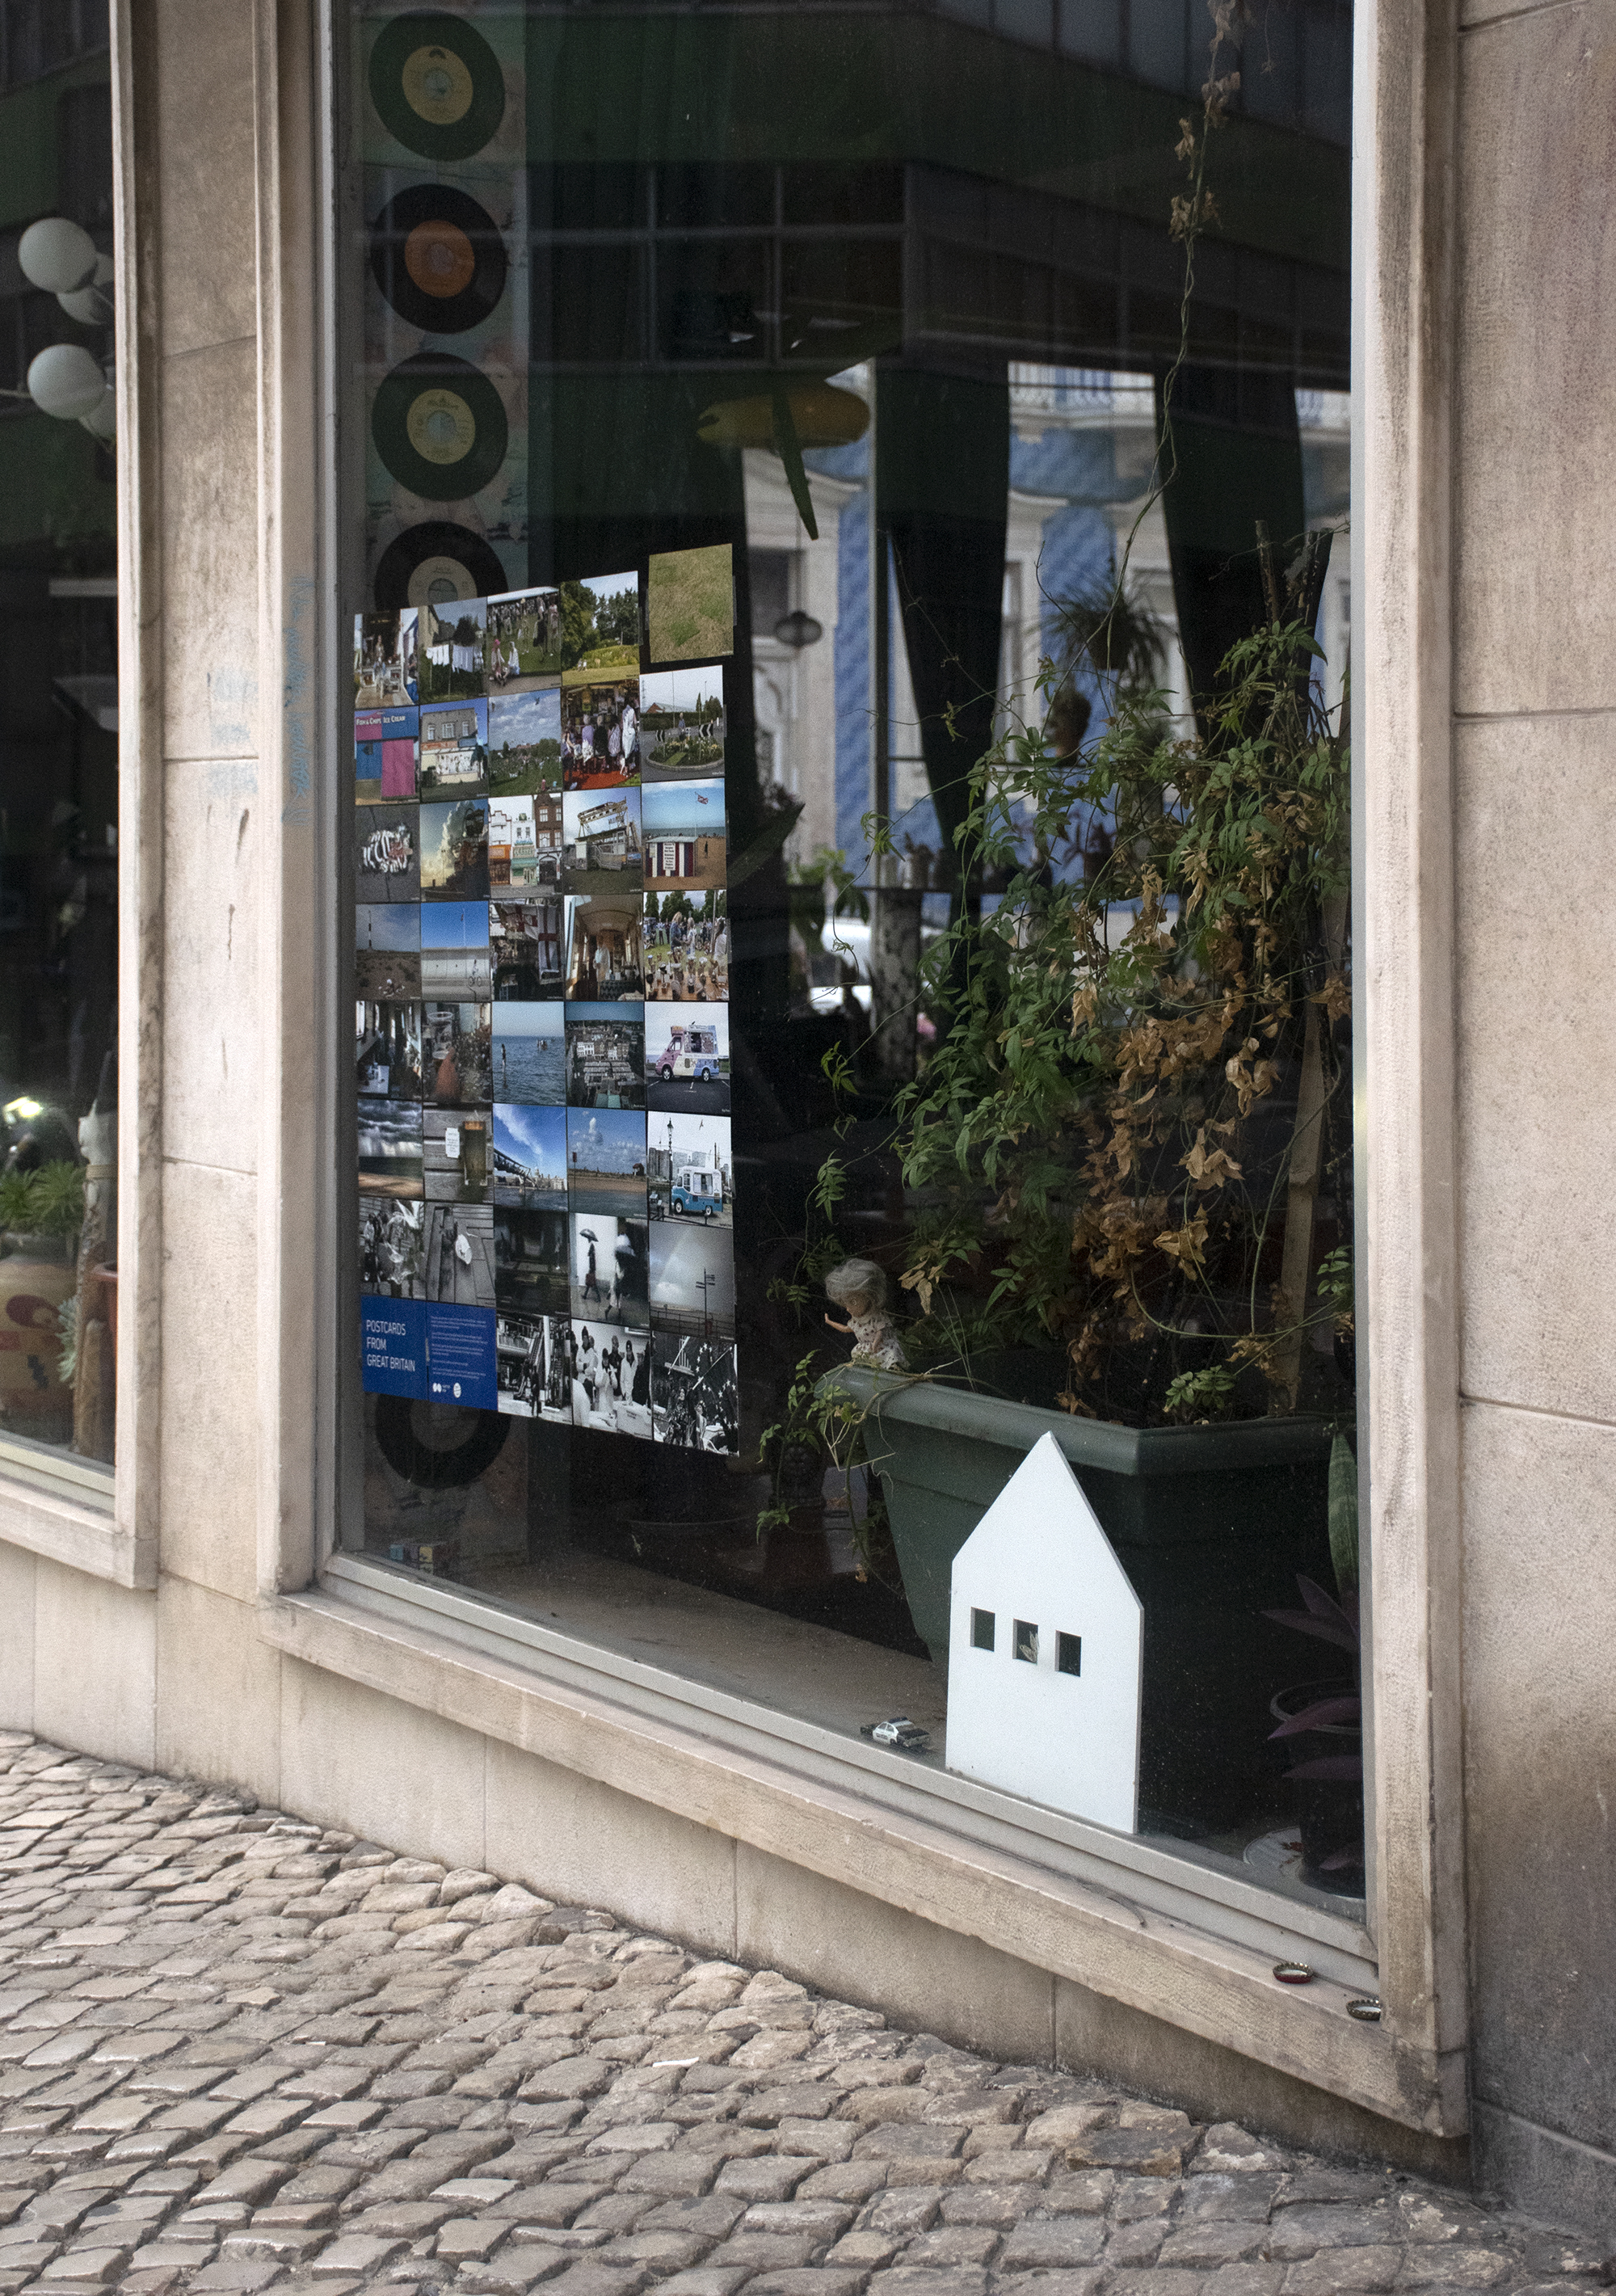 A street in Lisbon, Portugal. In one of the shop windows there is an exhibition of Shutter Hubs Postcards from Great Britain project, lots of postcard sized photographs